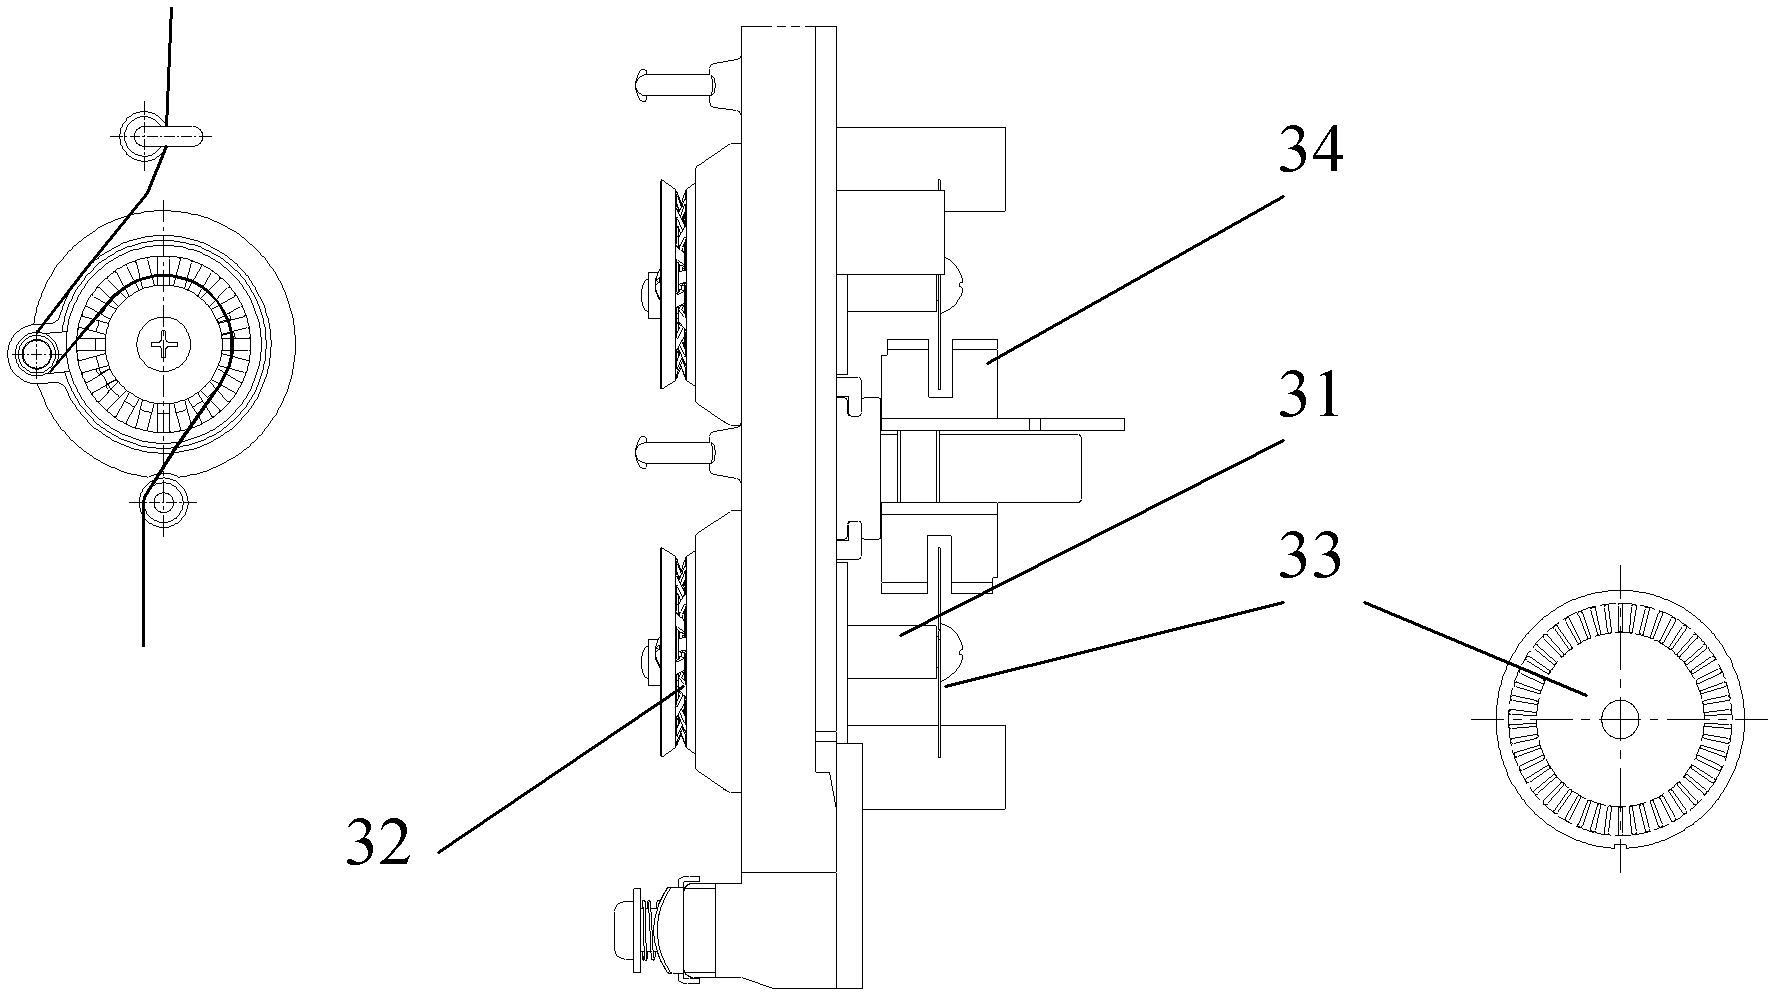 Real-time monitoring method and monitoring system for thread condition of computerized embroidery machine